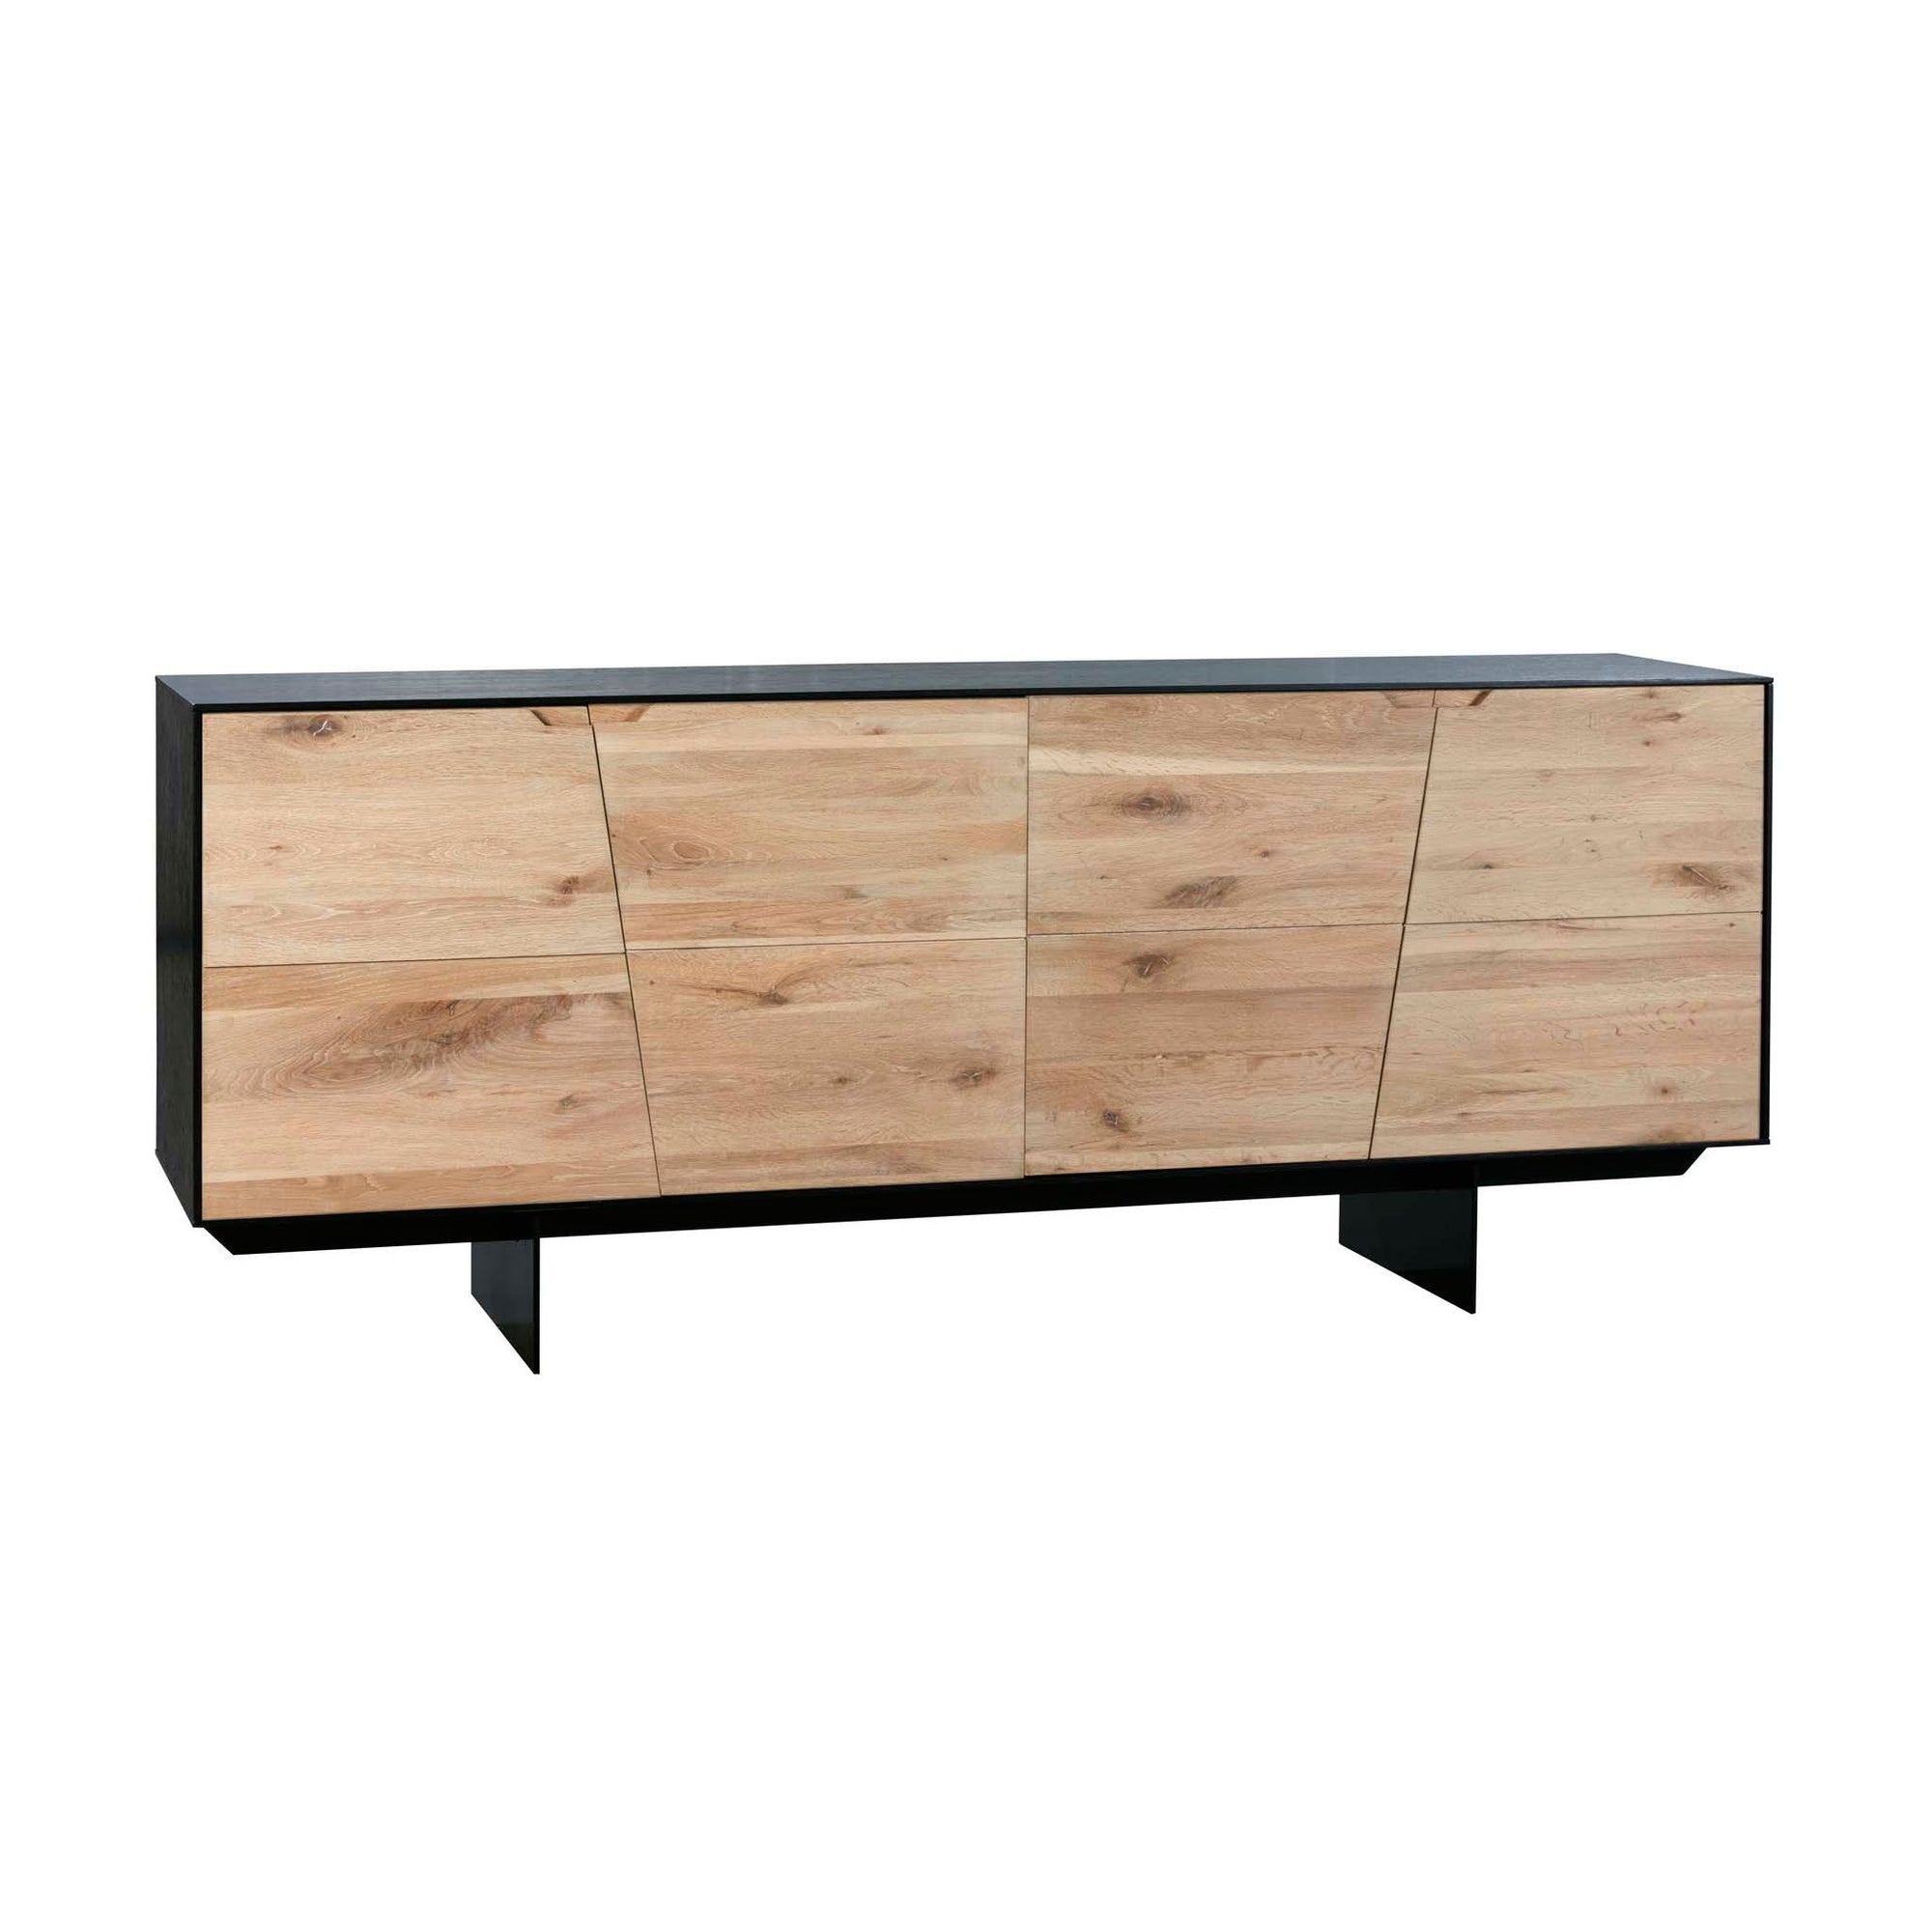 MOES-INSTINCT SIDEBOARD-Sideboards & Buffets-MODTEMPO